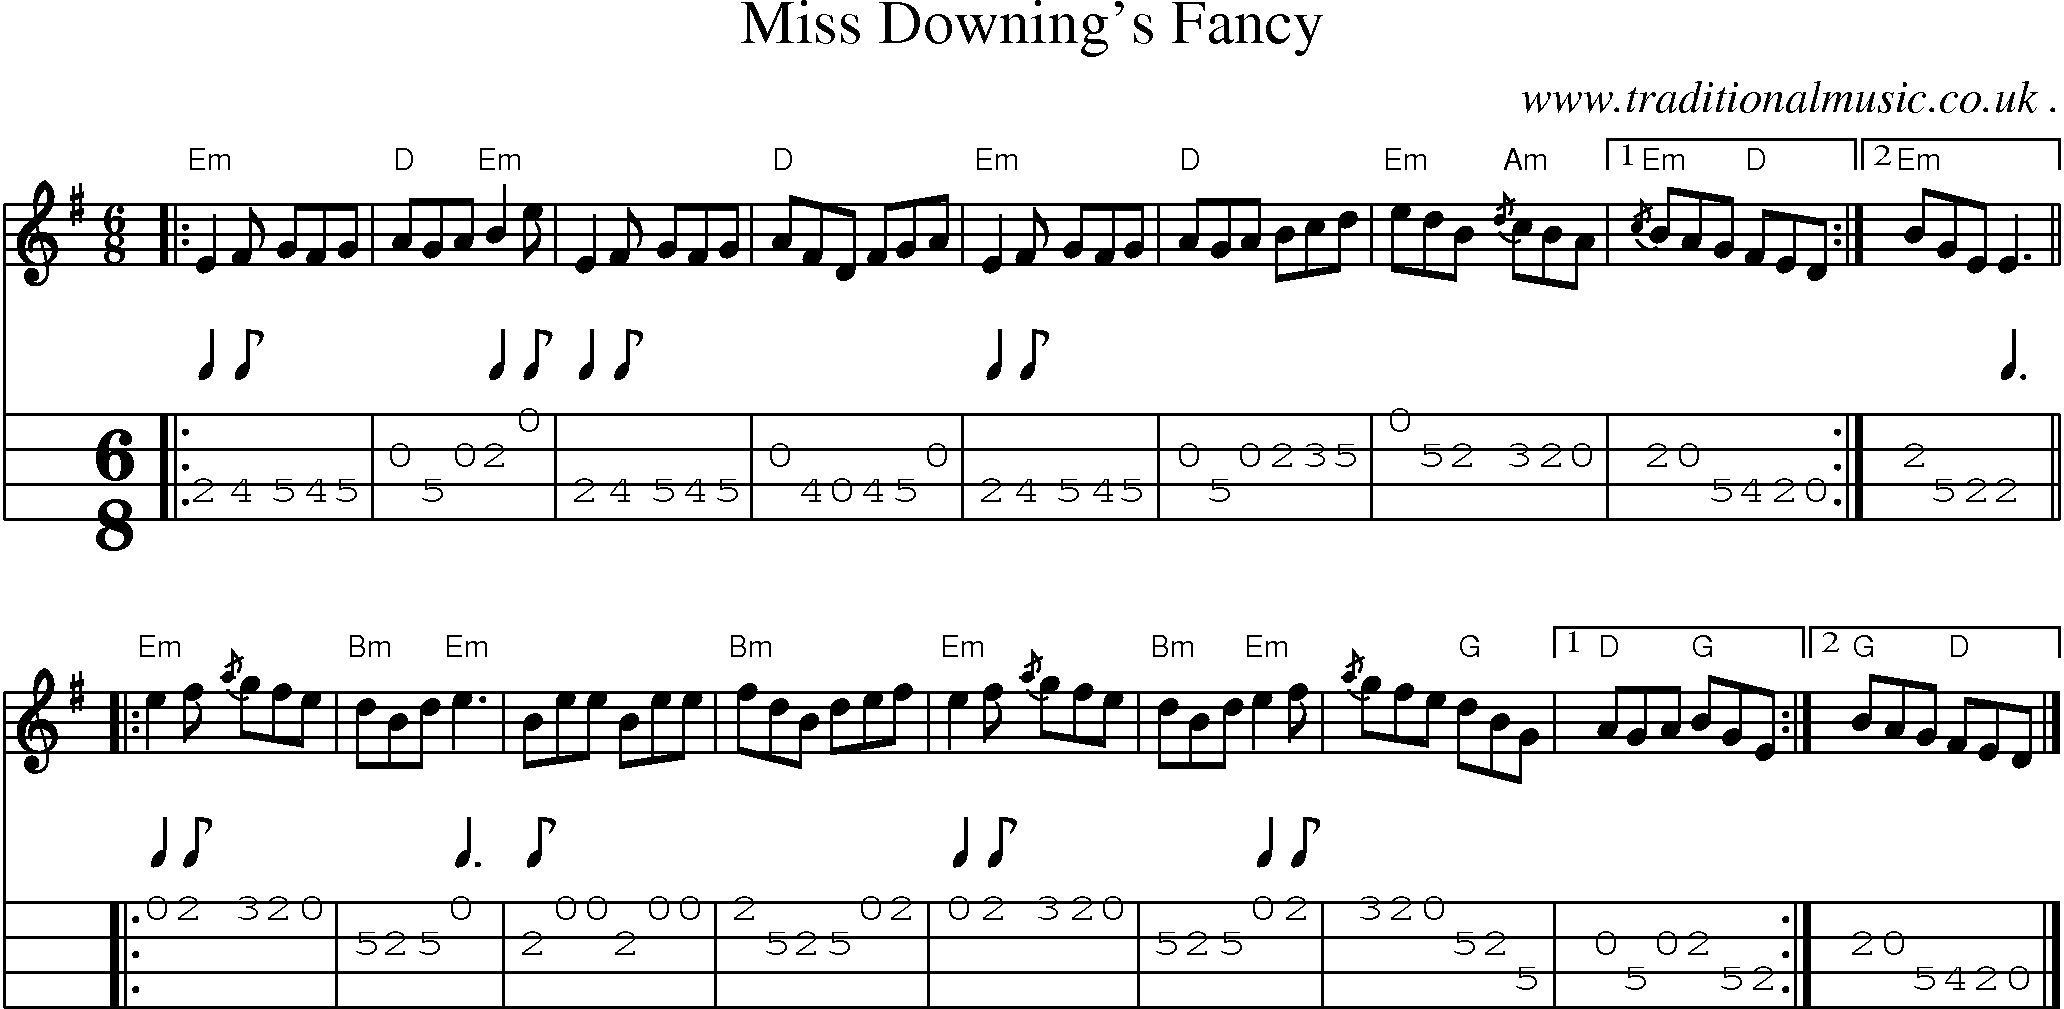 Sheet-music  score, Chords and Mandolin Tabs for Miss Downings Fancy